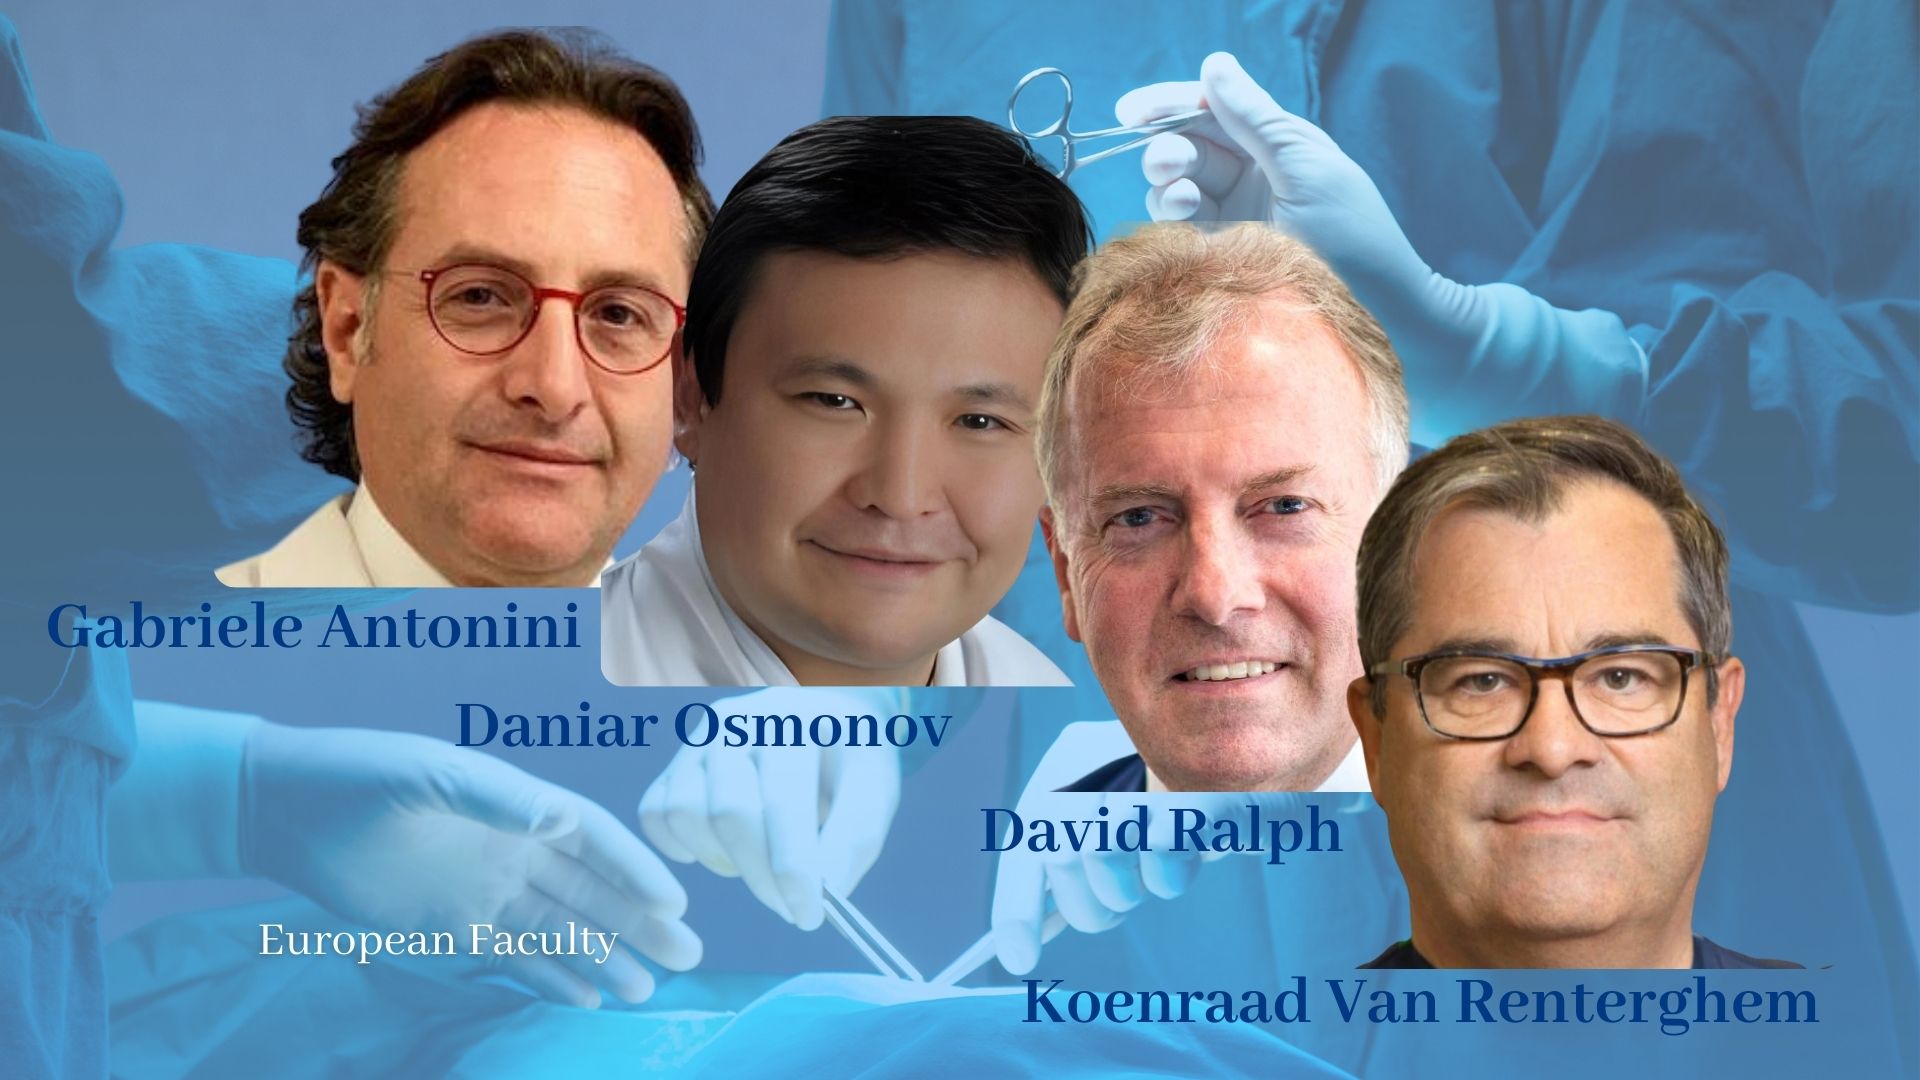 Live Surgery in Rome with the 4 Top European implanters